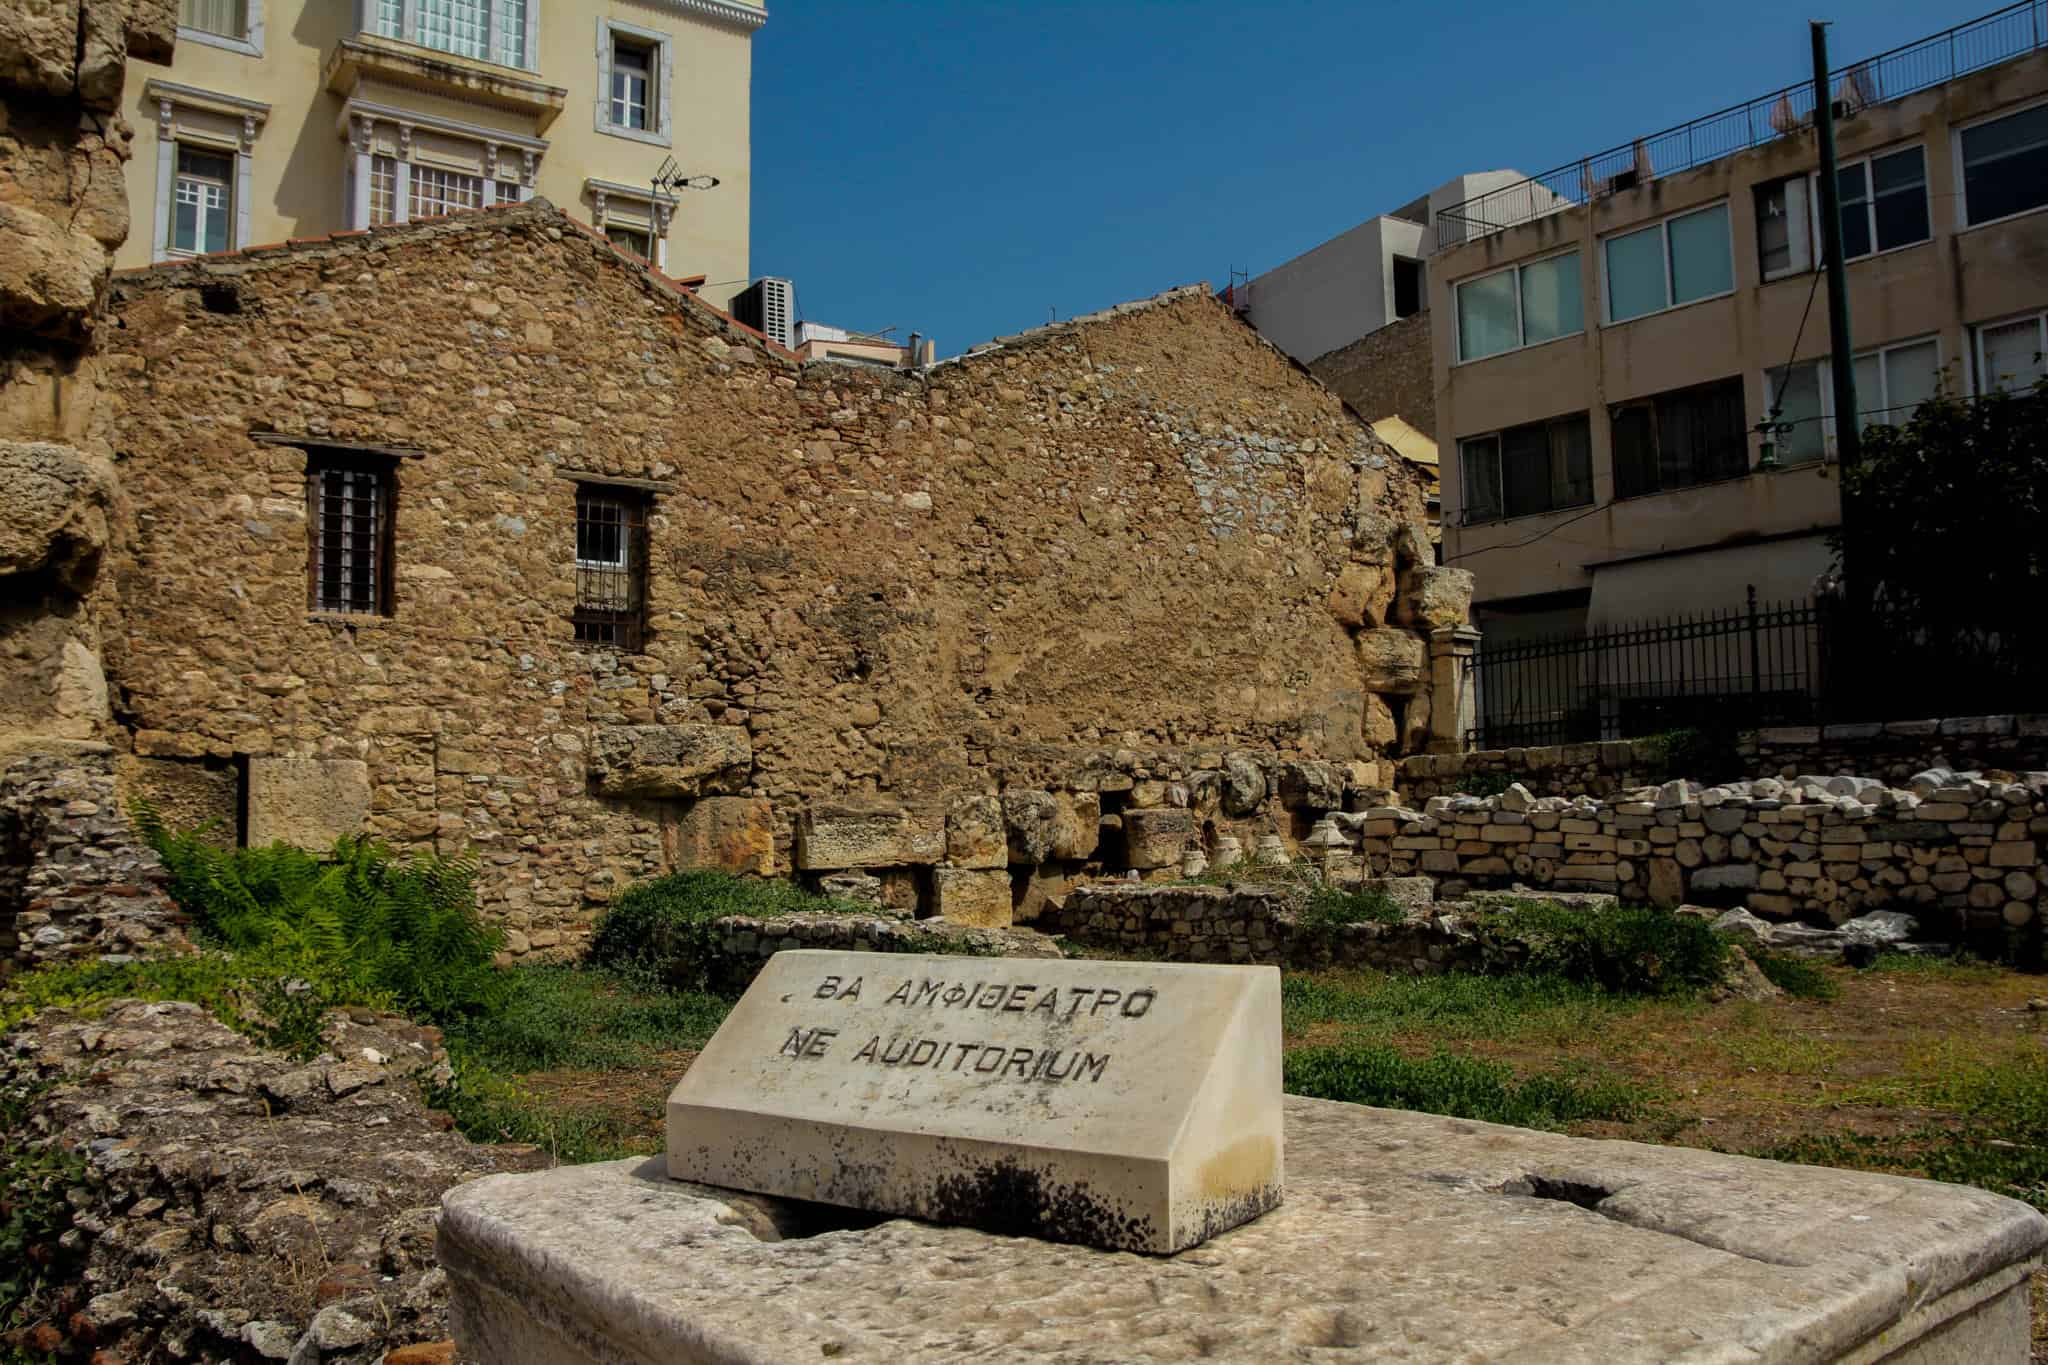 Hadrian's Library is one of the ruins in Athens